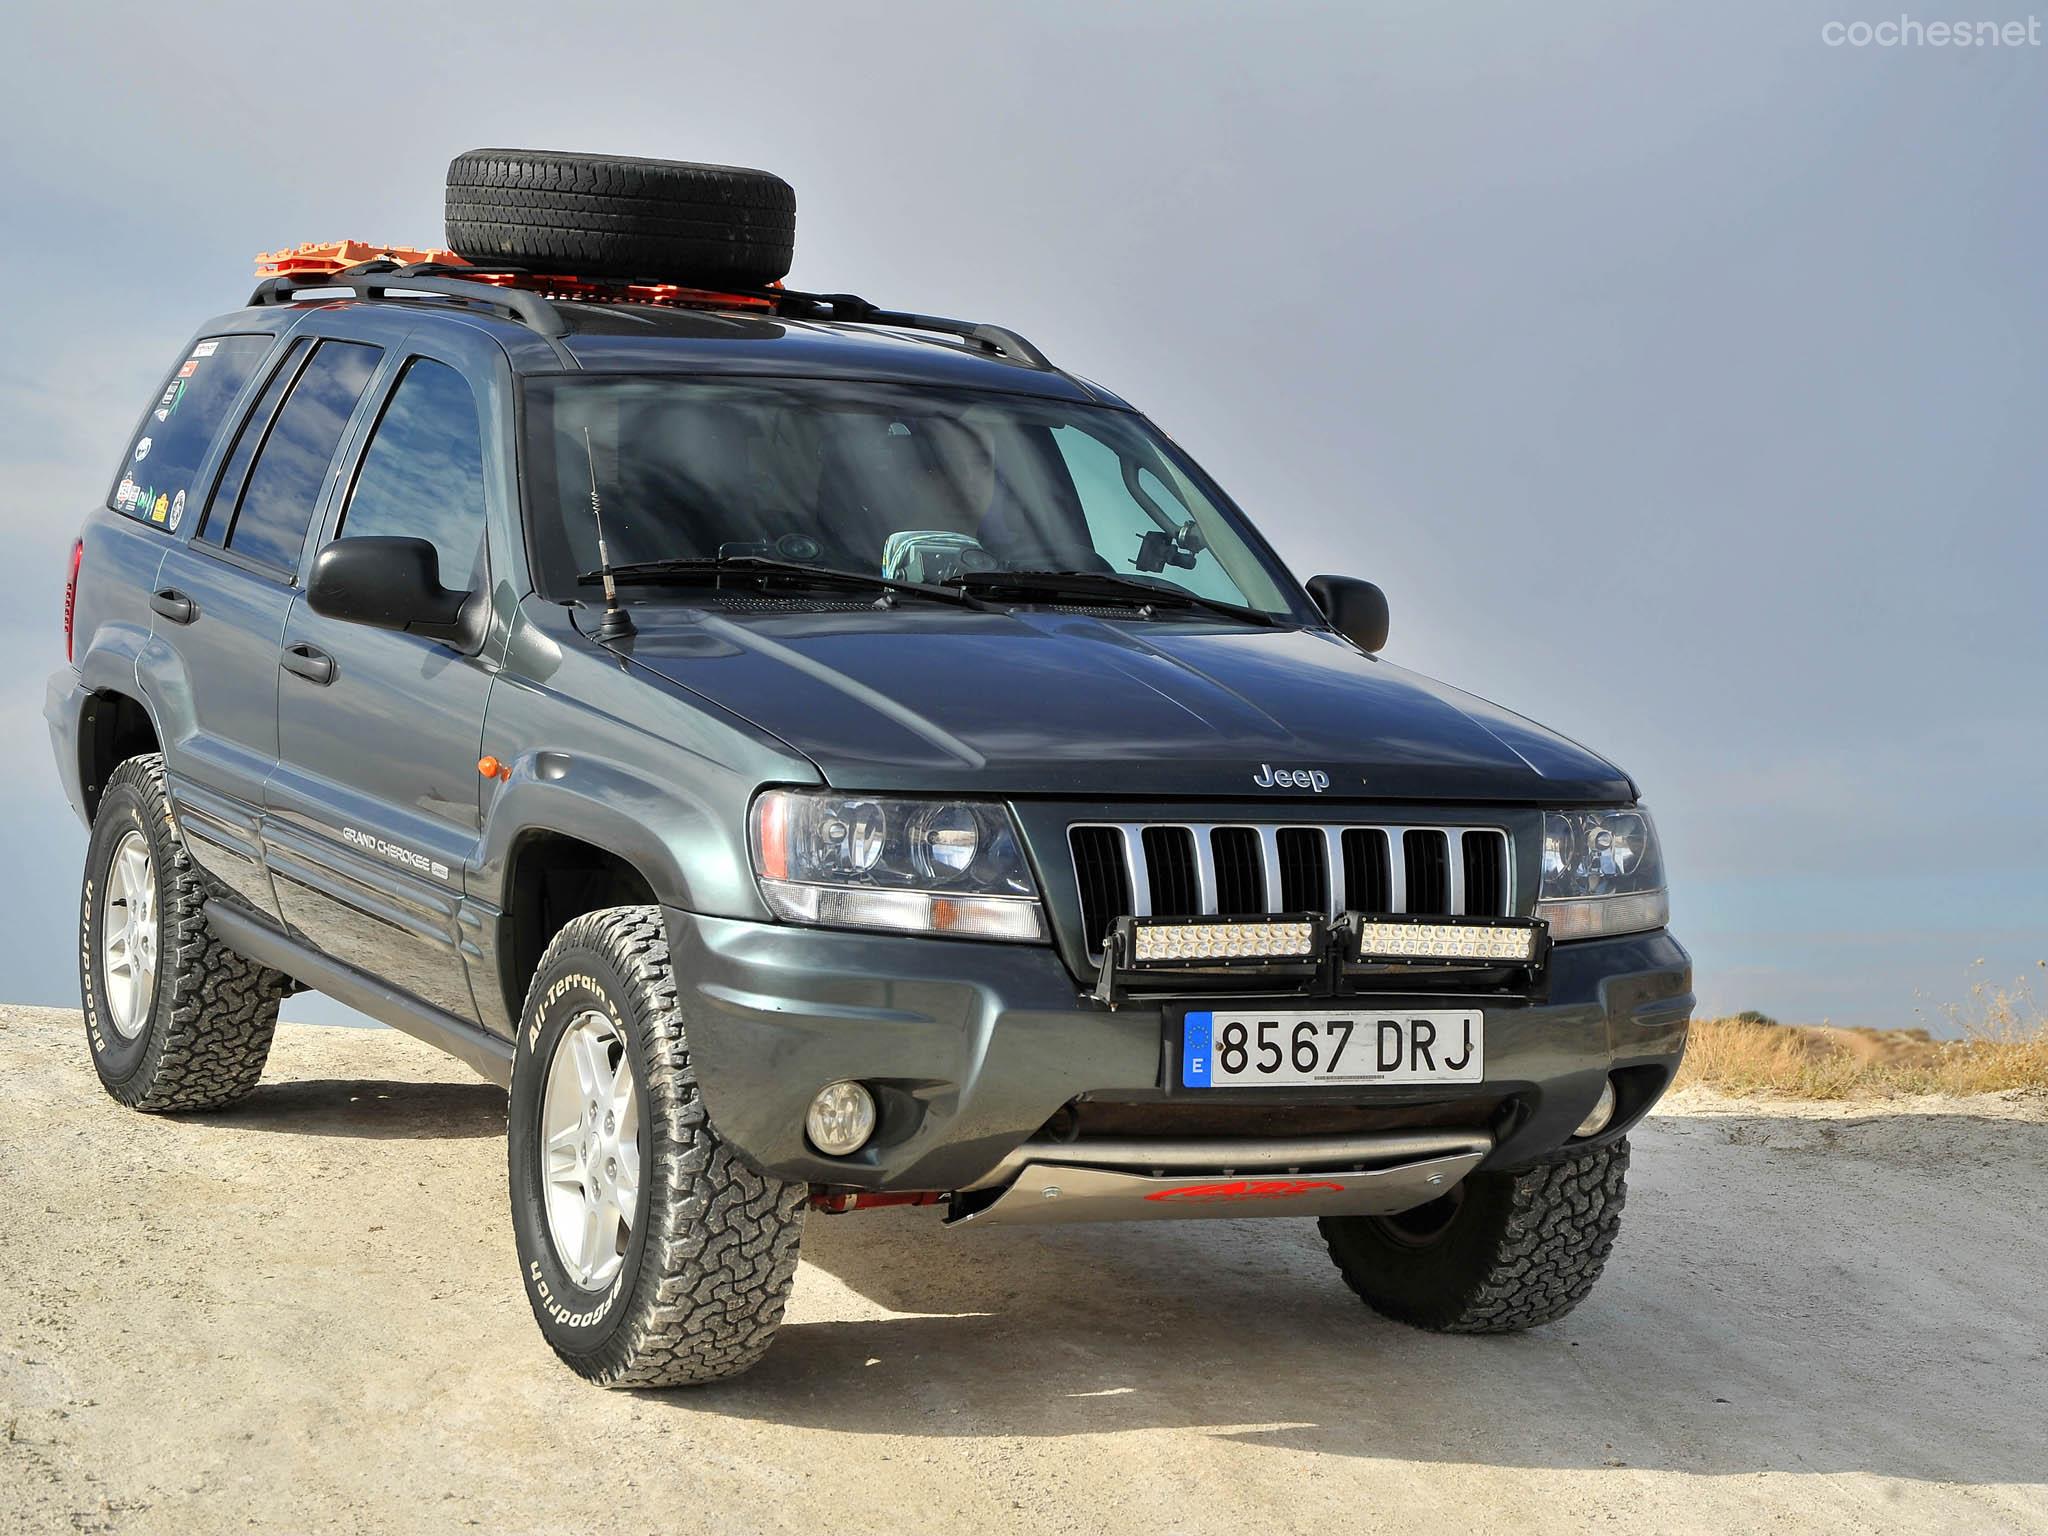 Extreme 4x4 expedition jeep grand cherokee #2